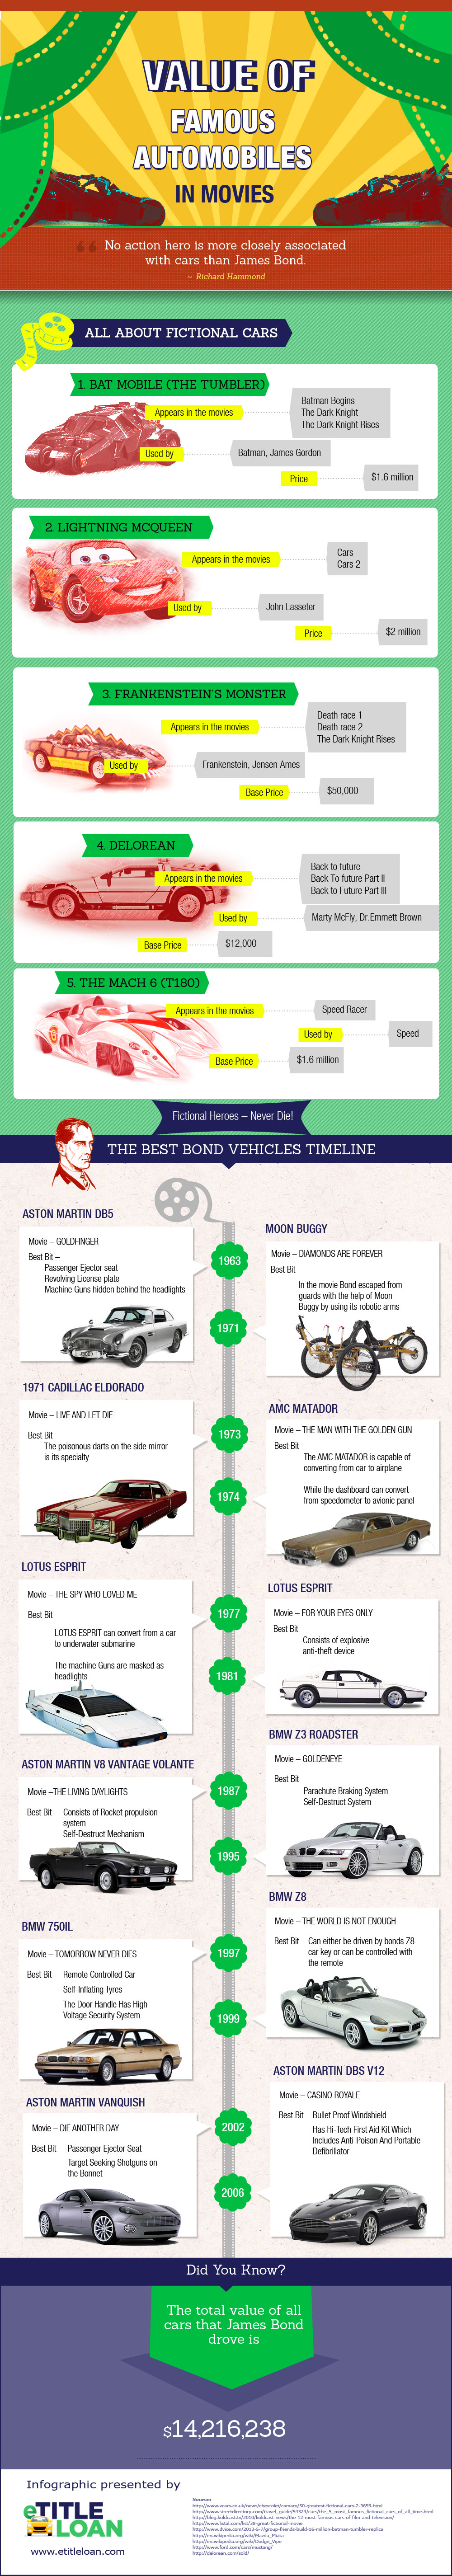 Value of Famous Automobiles in Movies